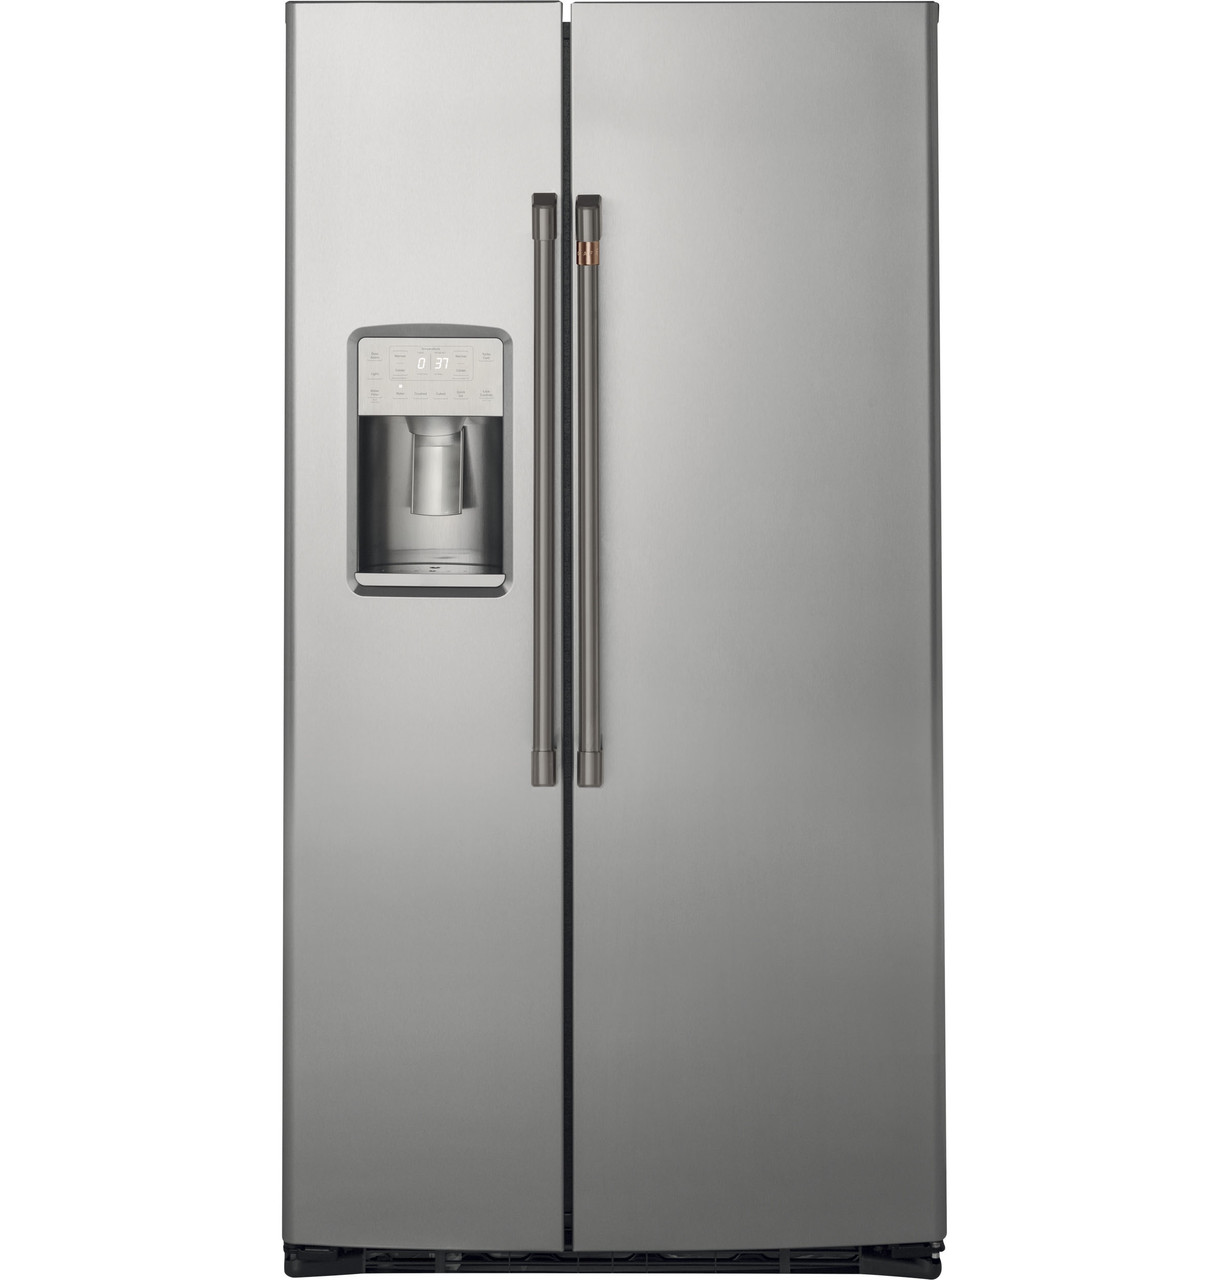 Find Quick Solutions for Your Ge Refrigerator's Intermittent Buzzing Noise!